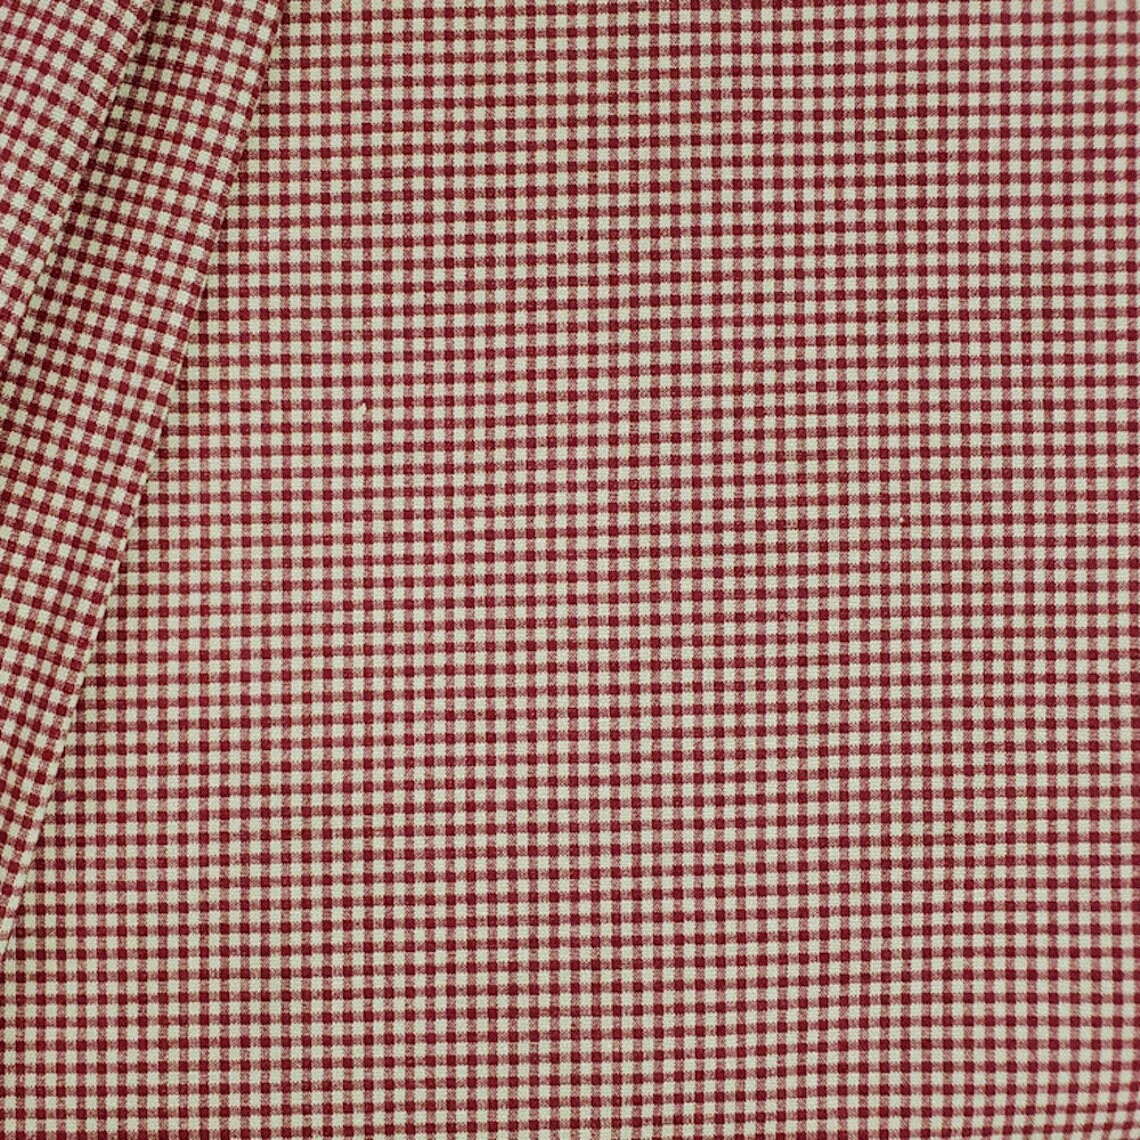 rod pocket curtain panels pair in farmhouse red gingham check on beige